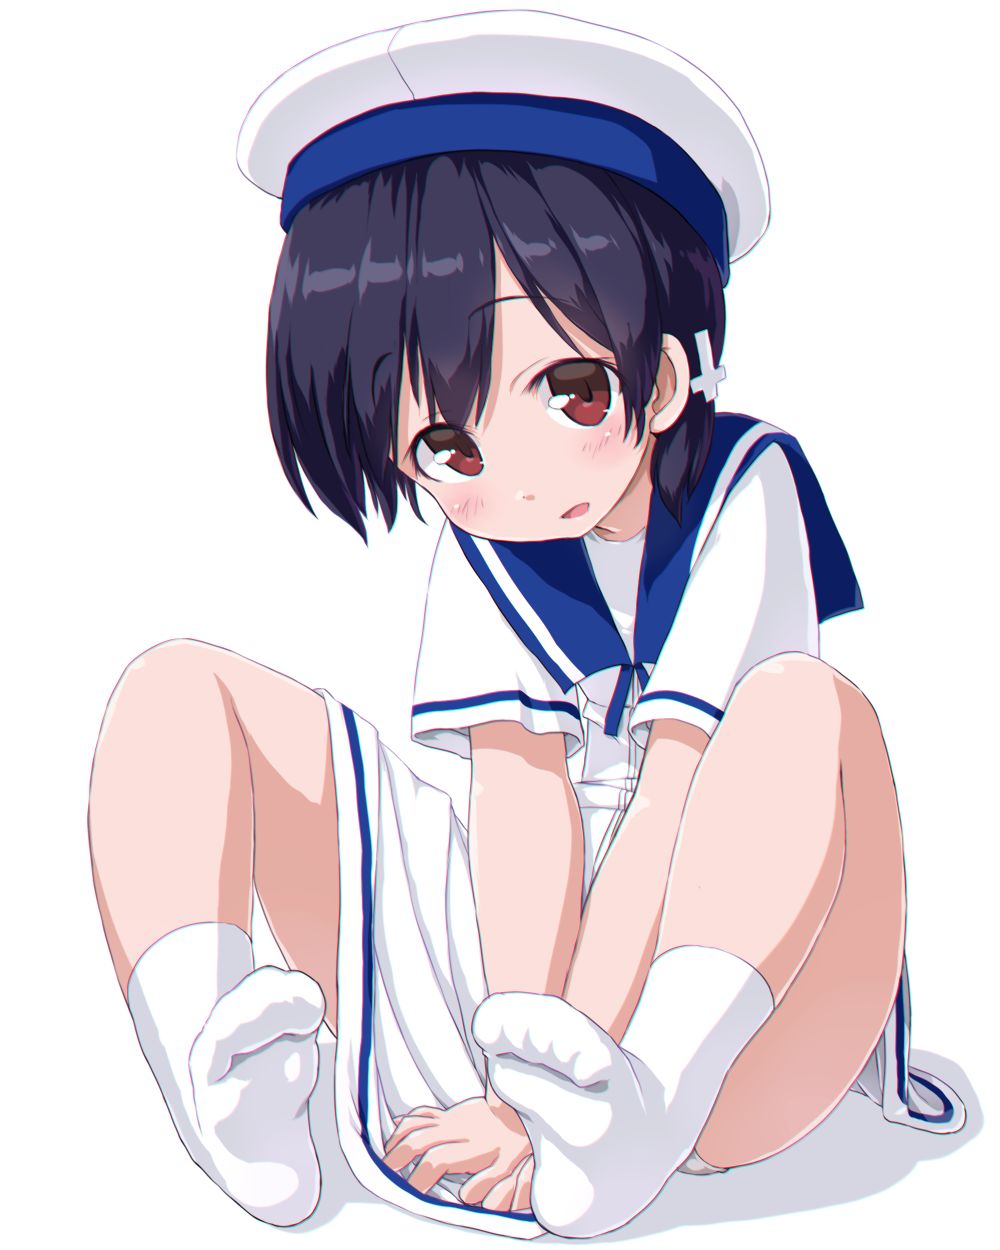 [Sun Peng-chan (ship this)] secondary erotic image of a cute Day swing of Sailor Dress in the Lollipedo sea defense ship of the fleet collection 1